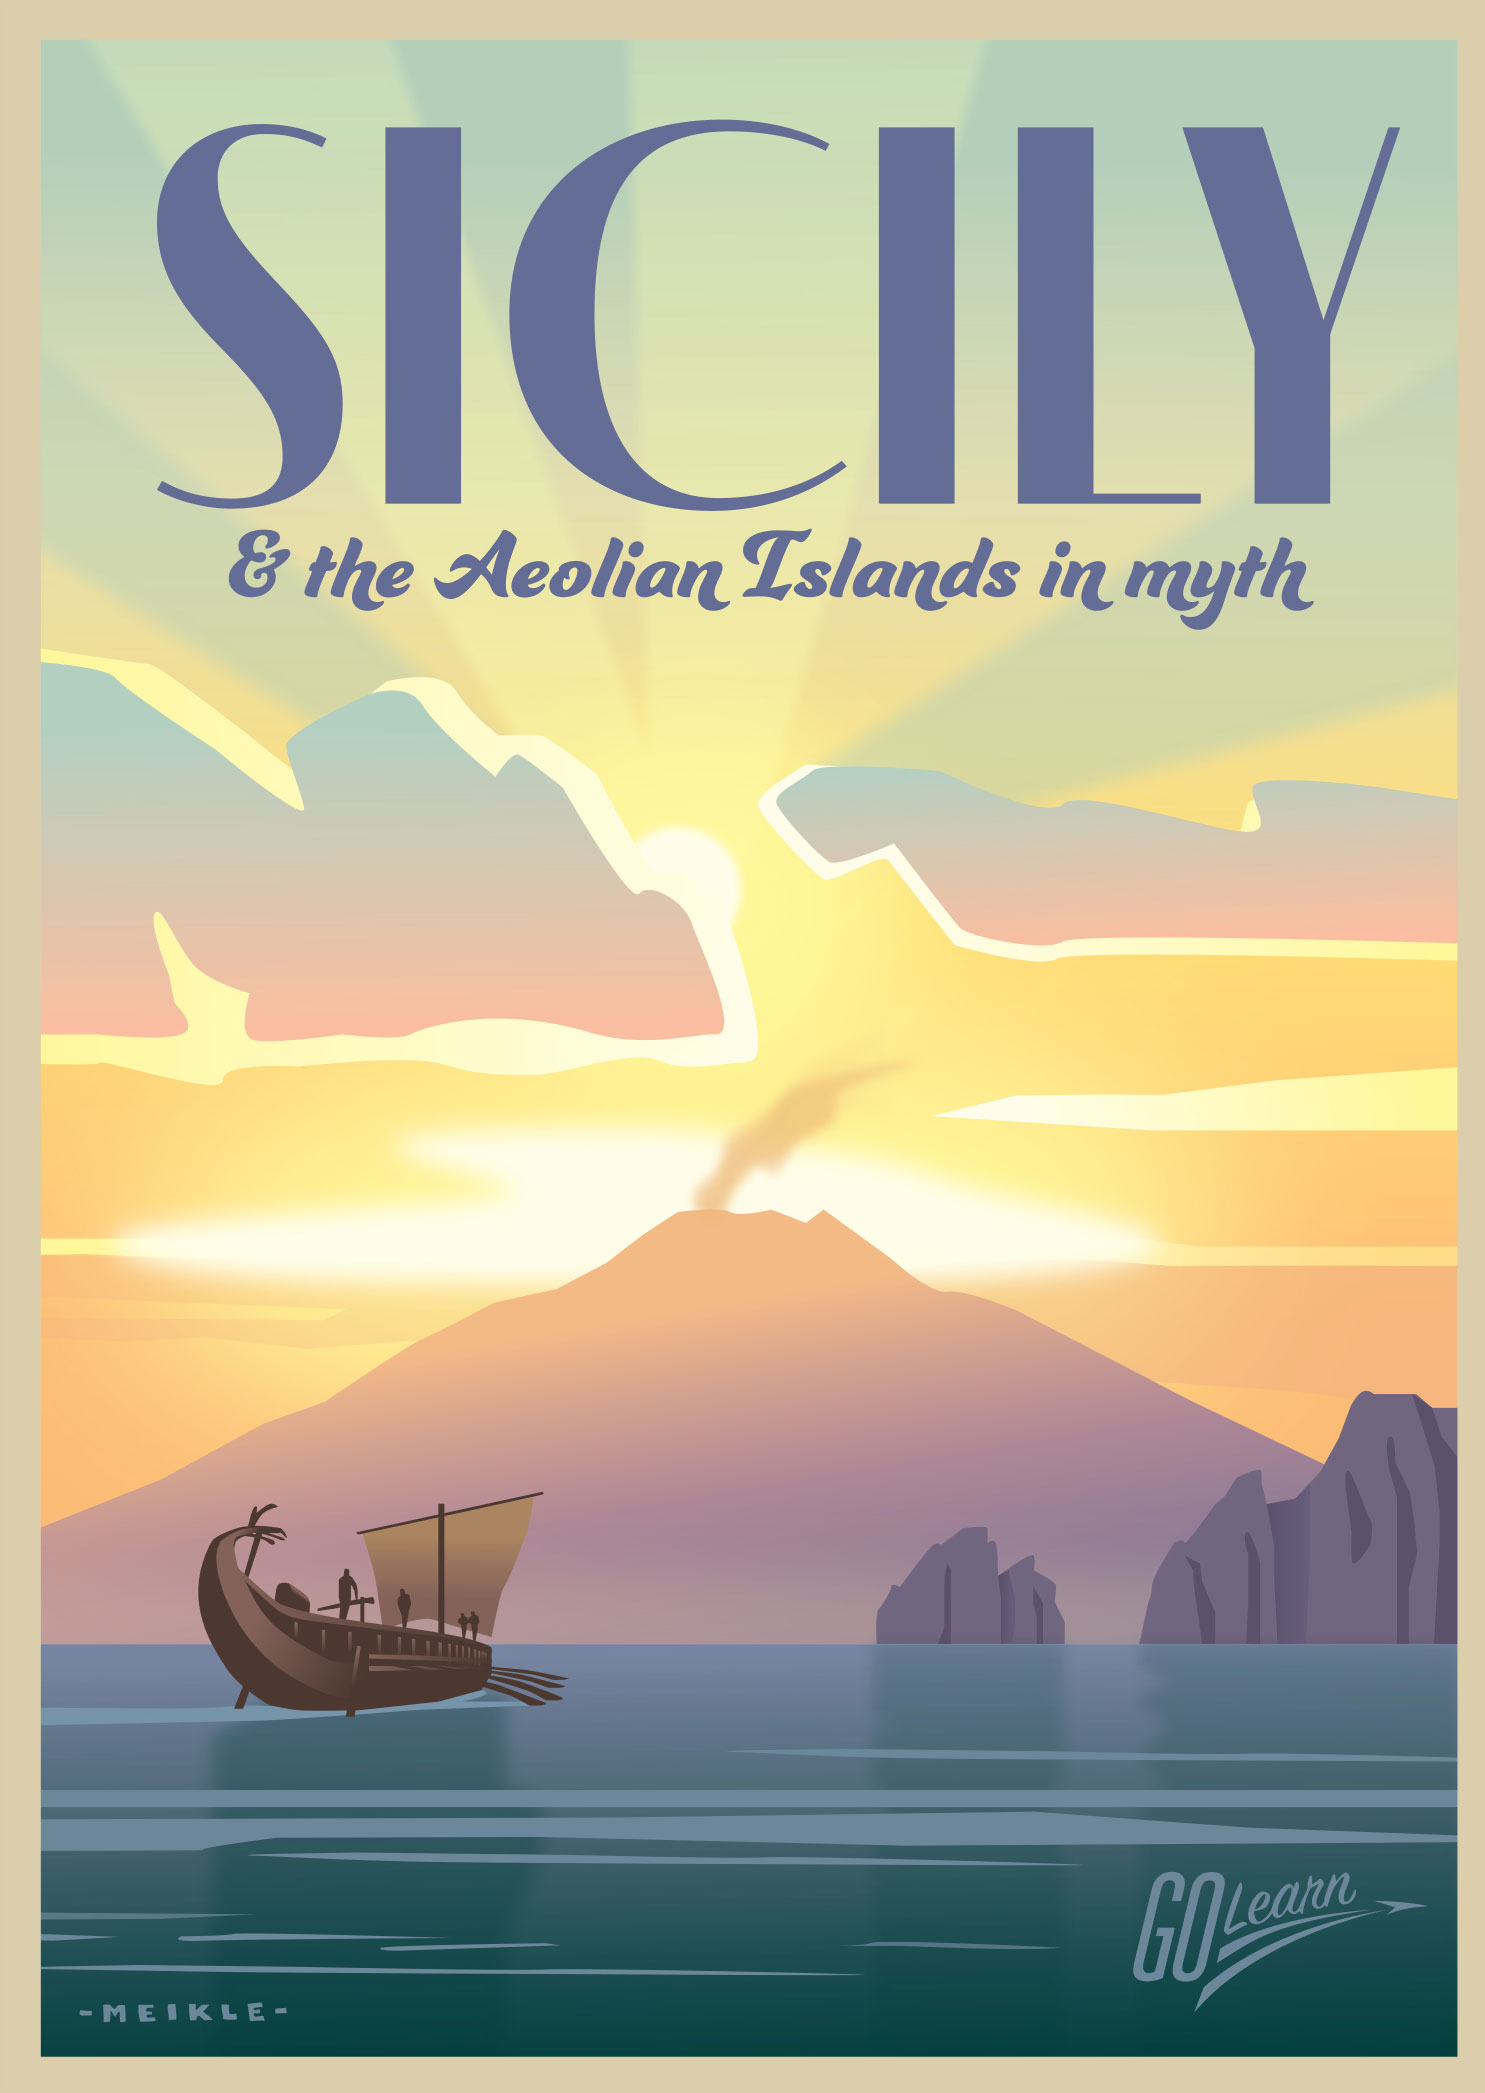 Sicily and the Aeolian Islands Go Learn poster